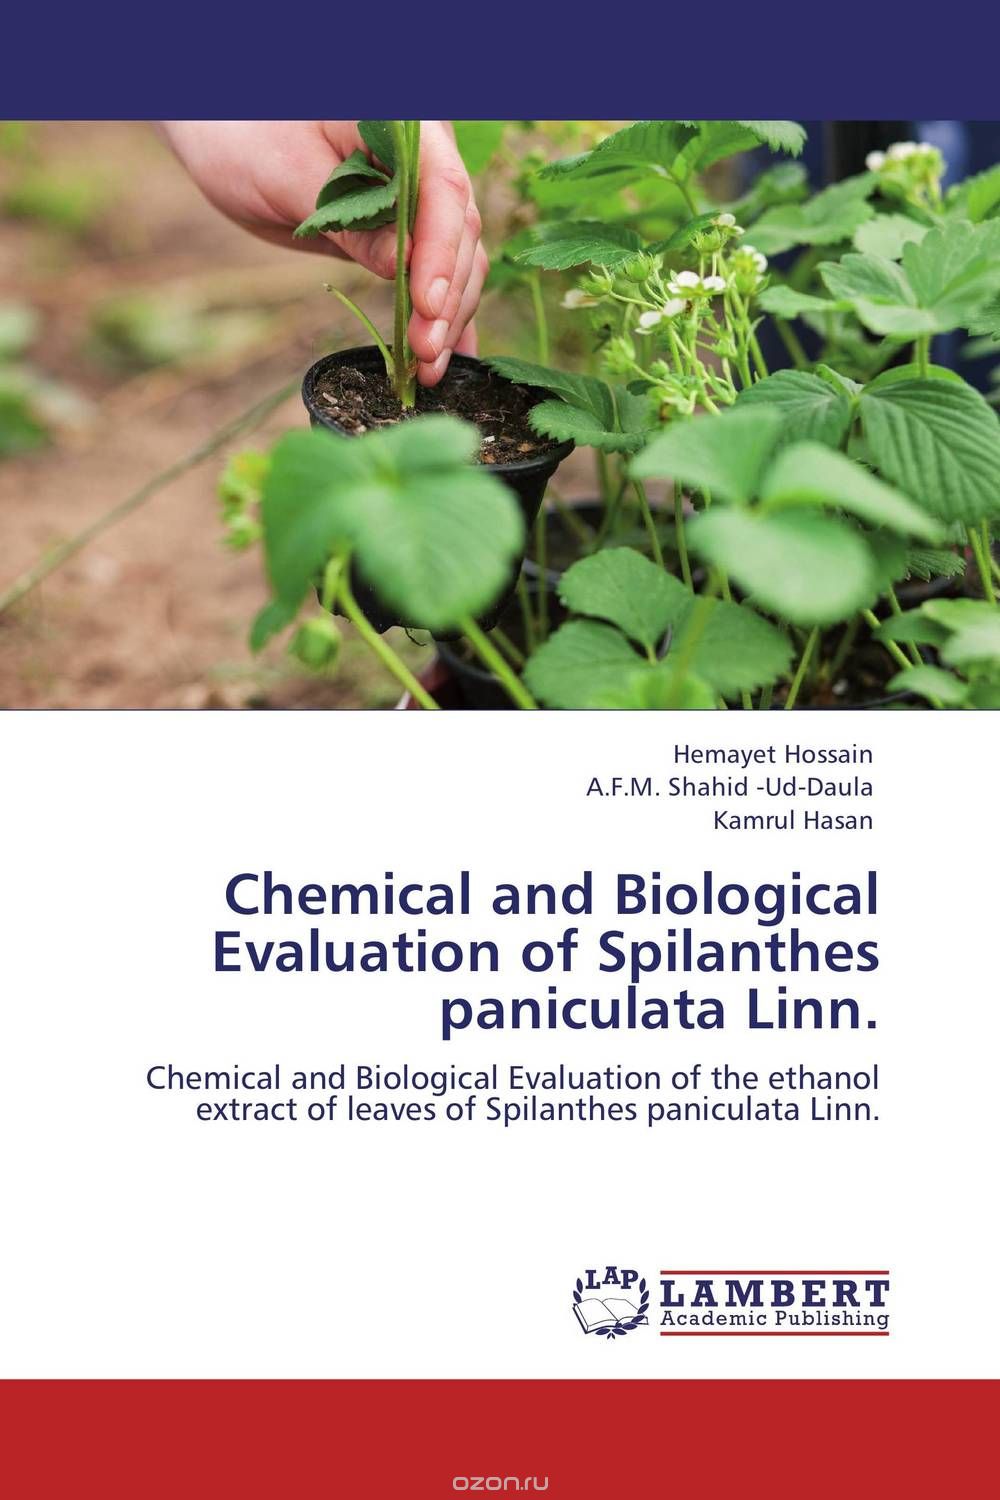 Chemical and Biological Evaluation of Spilanthes paniculata Linn.